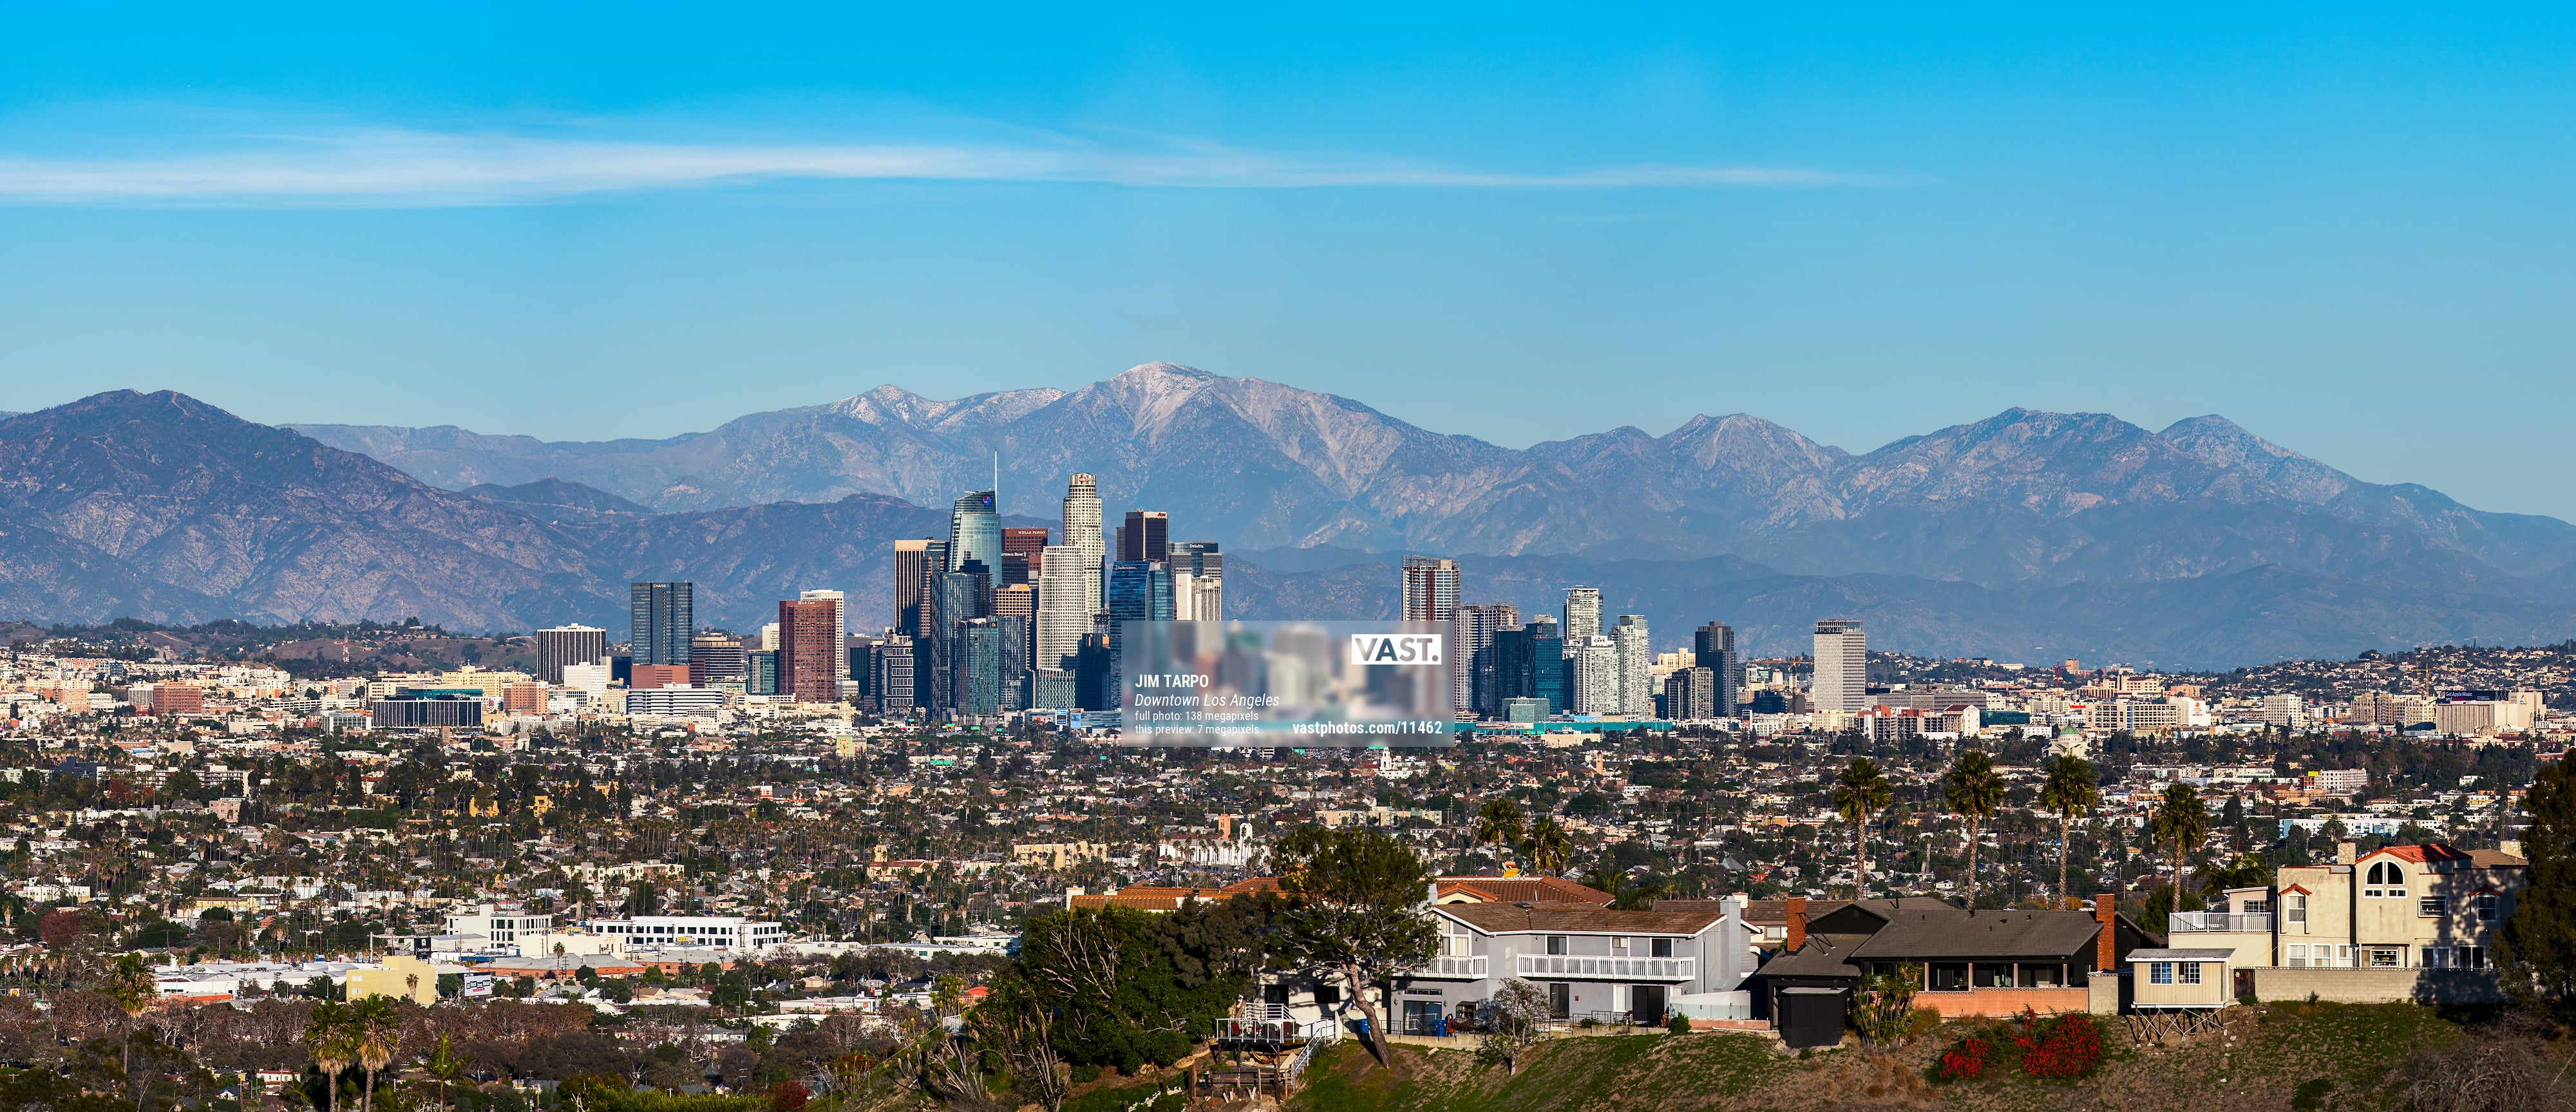 Los Angeles Wallpapers - Top 35 Best Los Angeles Backgrounds Download